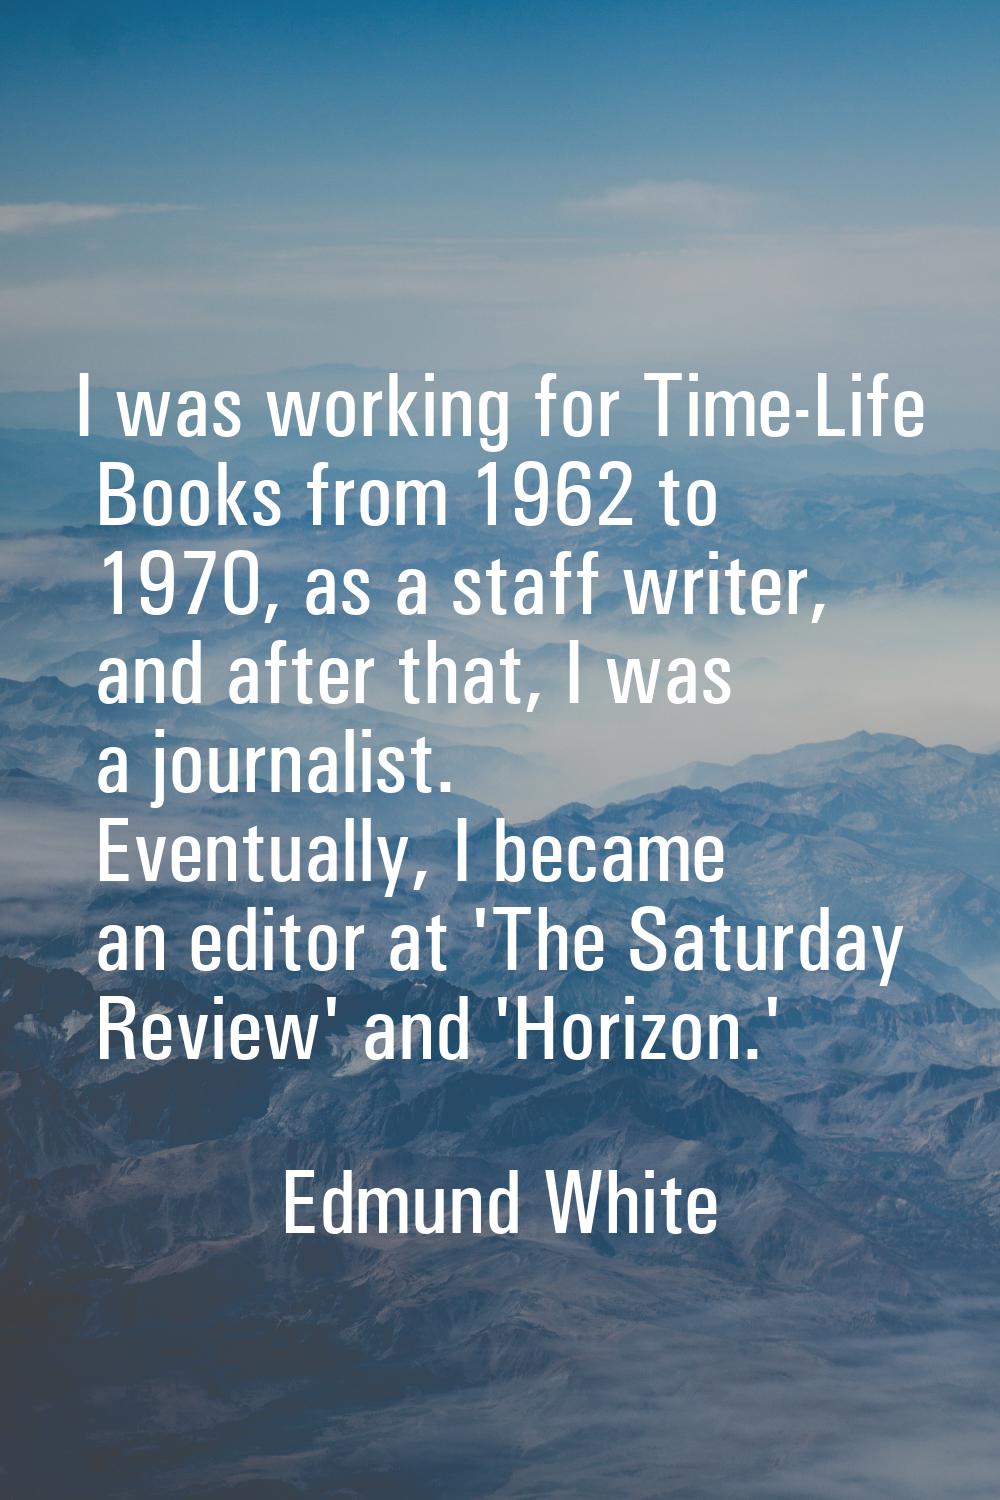 I was working for Time-Life Books from 1962 to 1970, as a staff writer, and after that, I was a jou